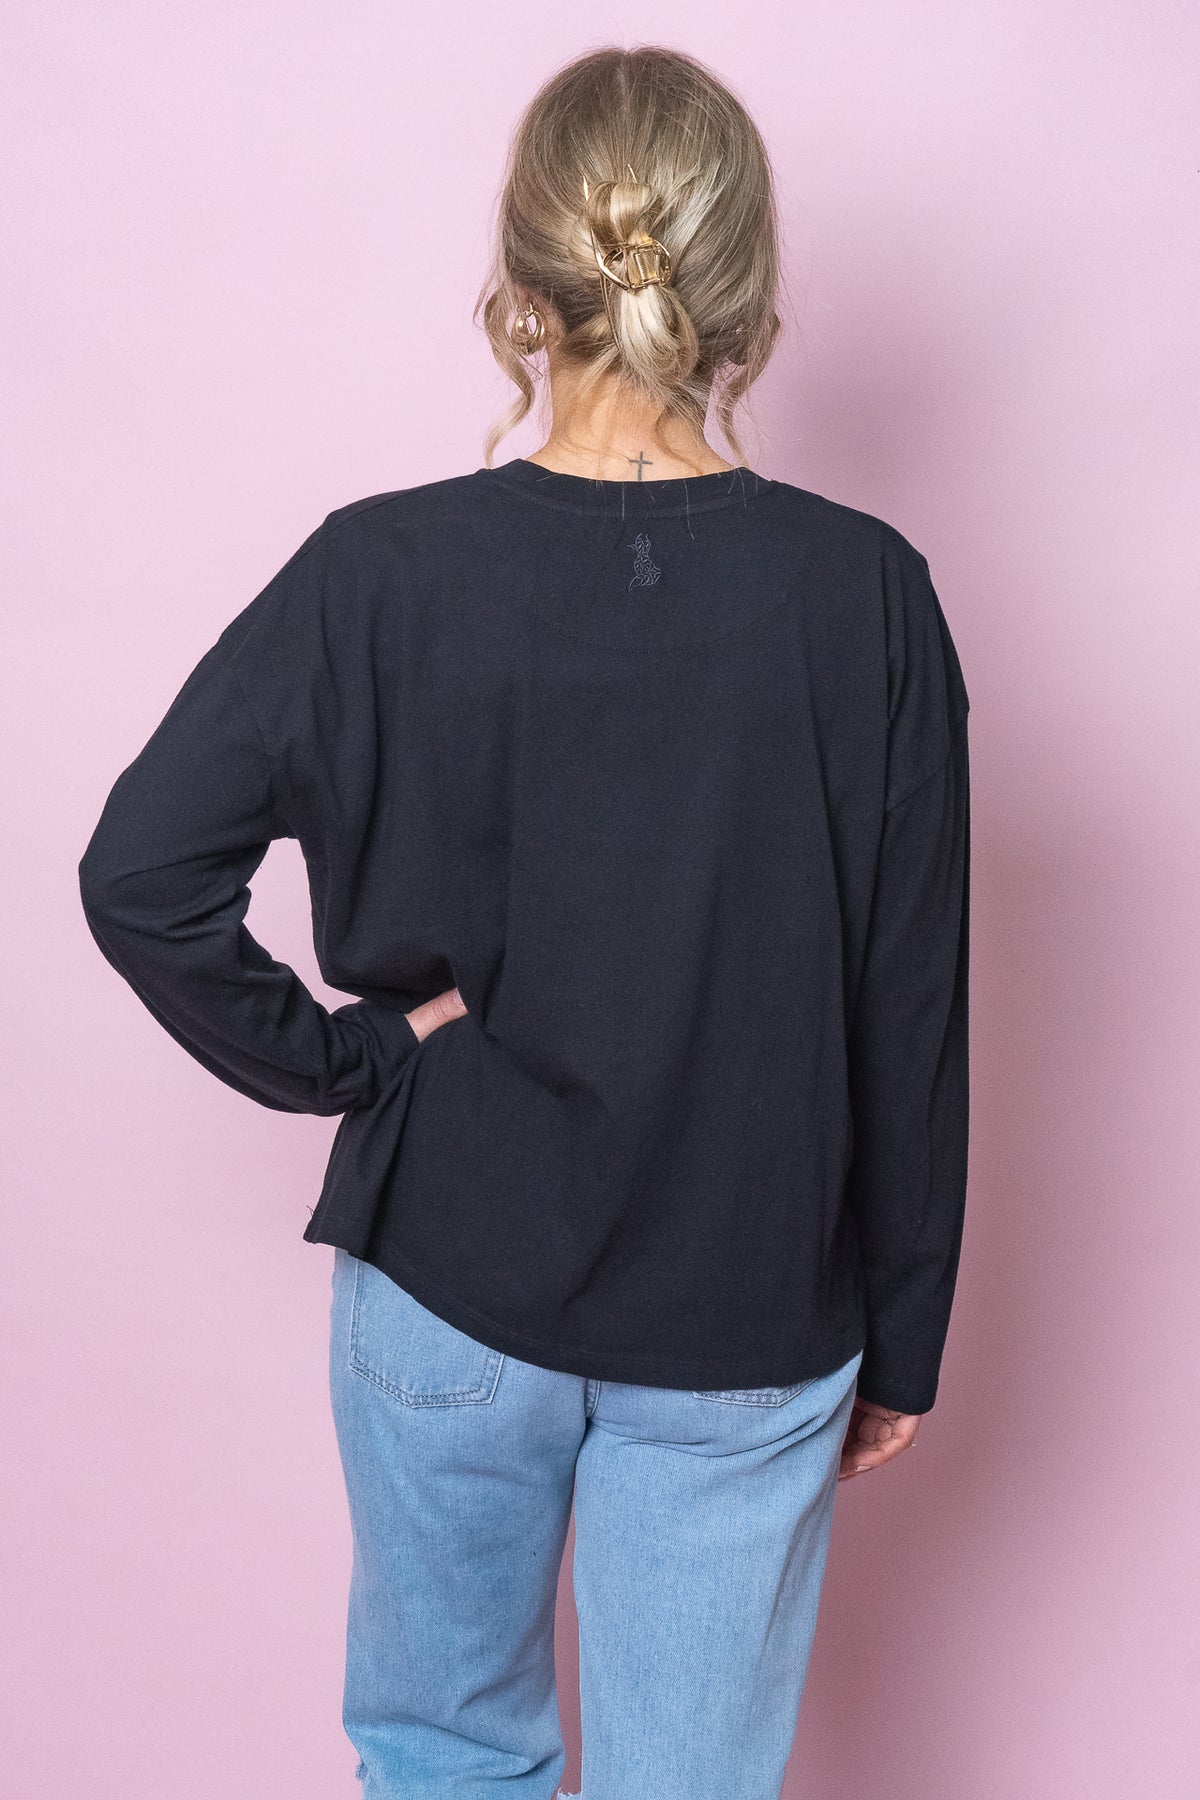 Hold Up Long Sleeve Top in Washed Black - Foxwood